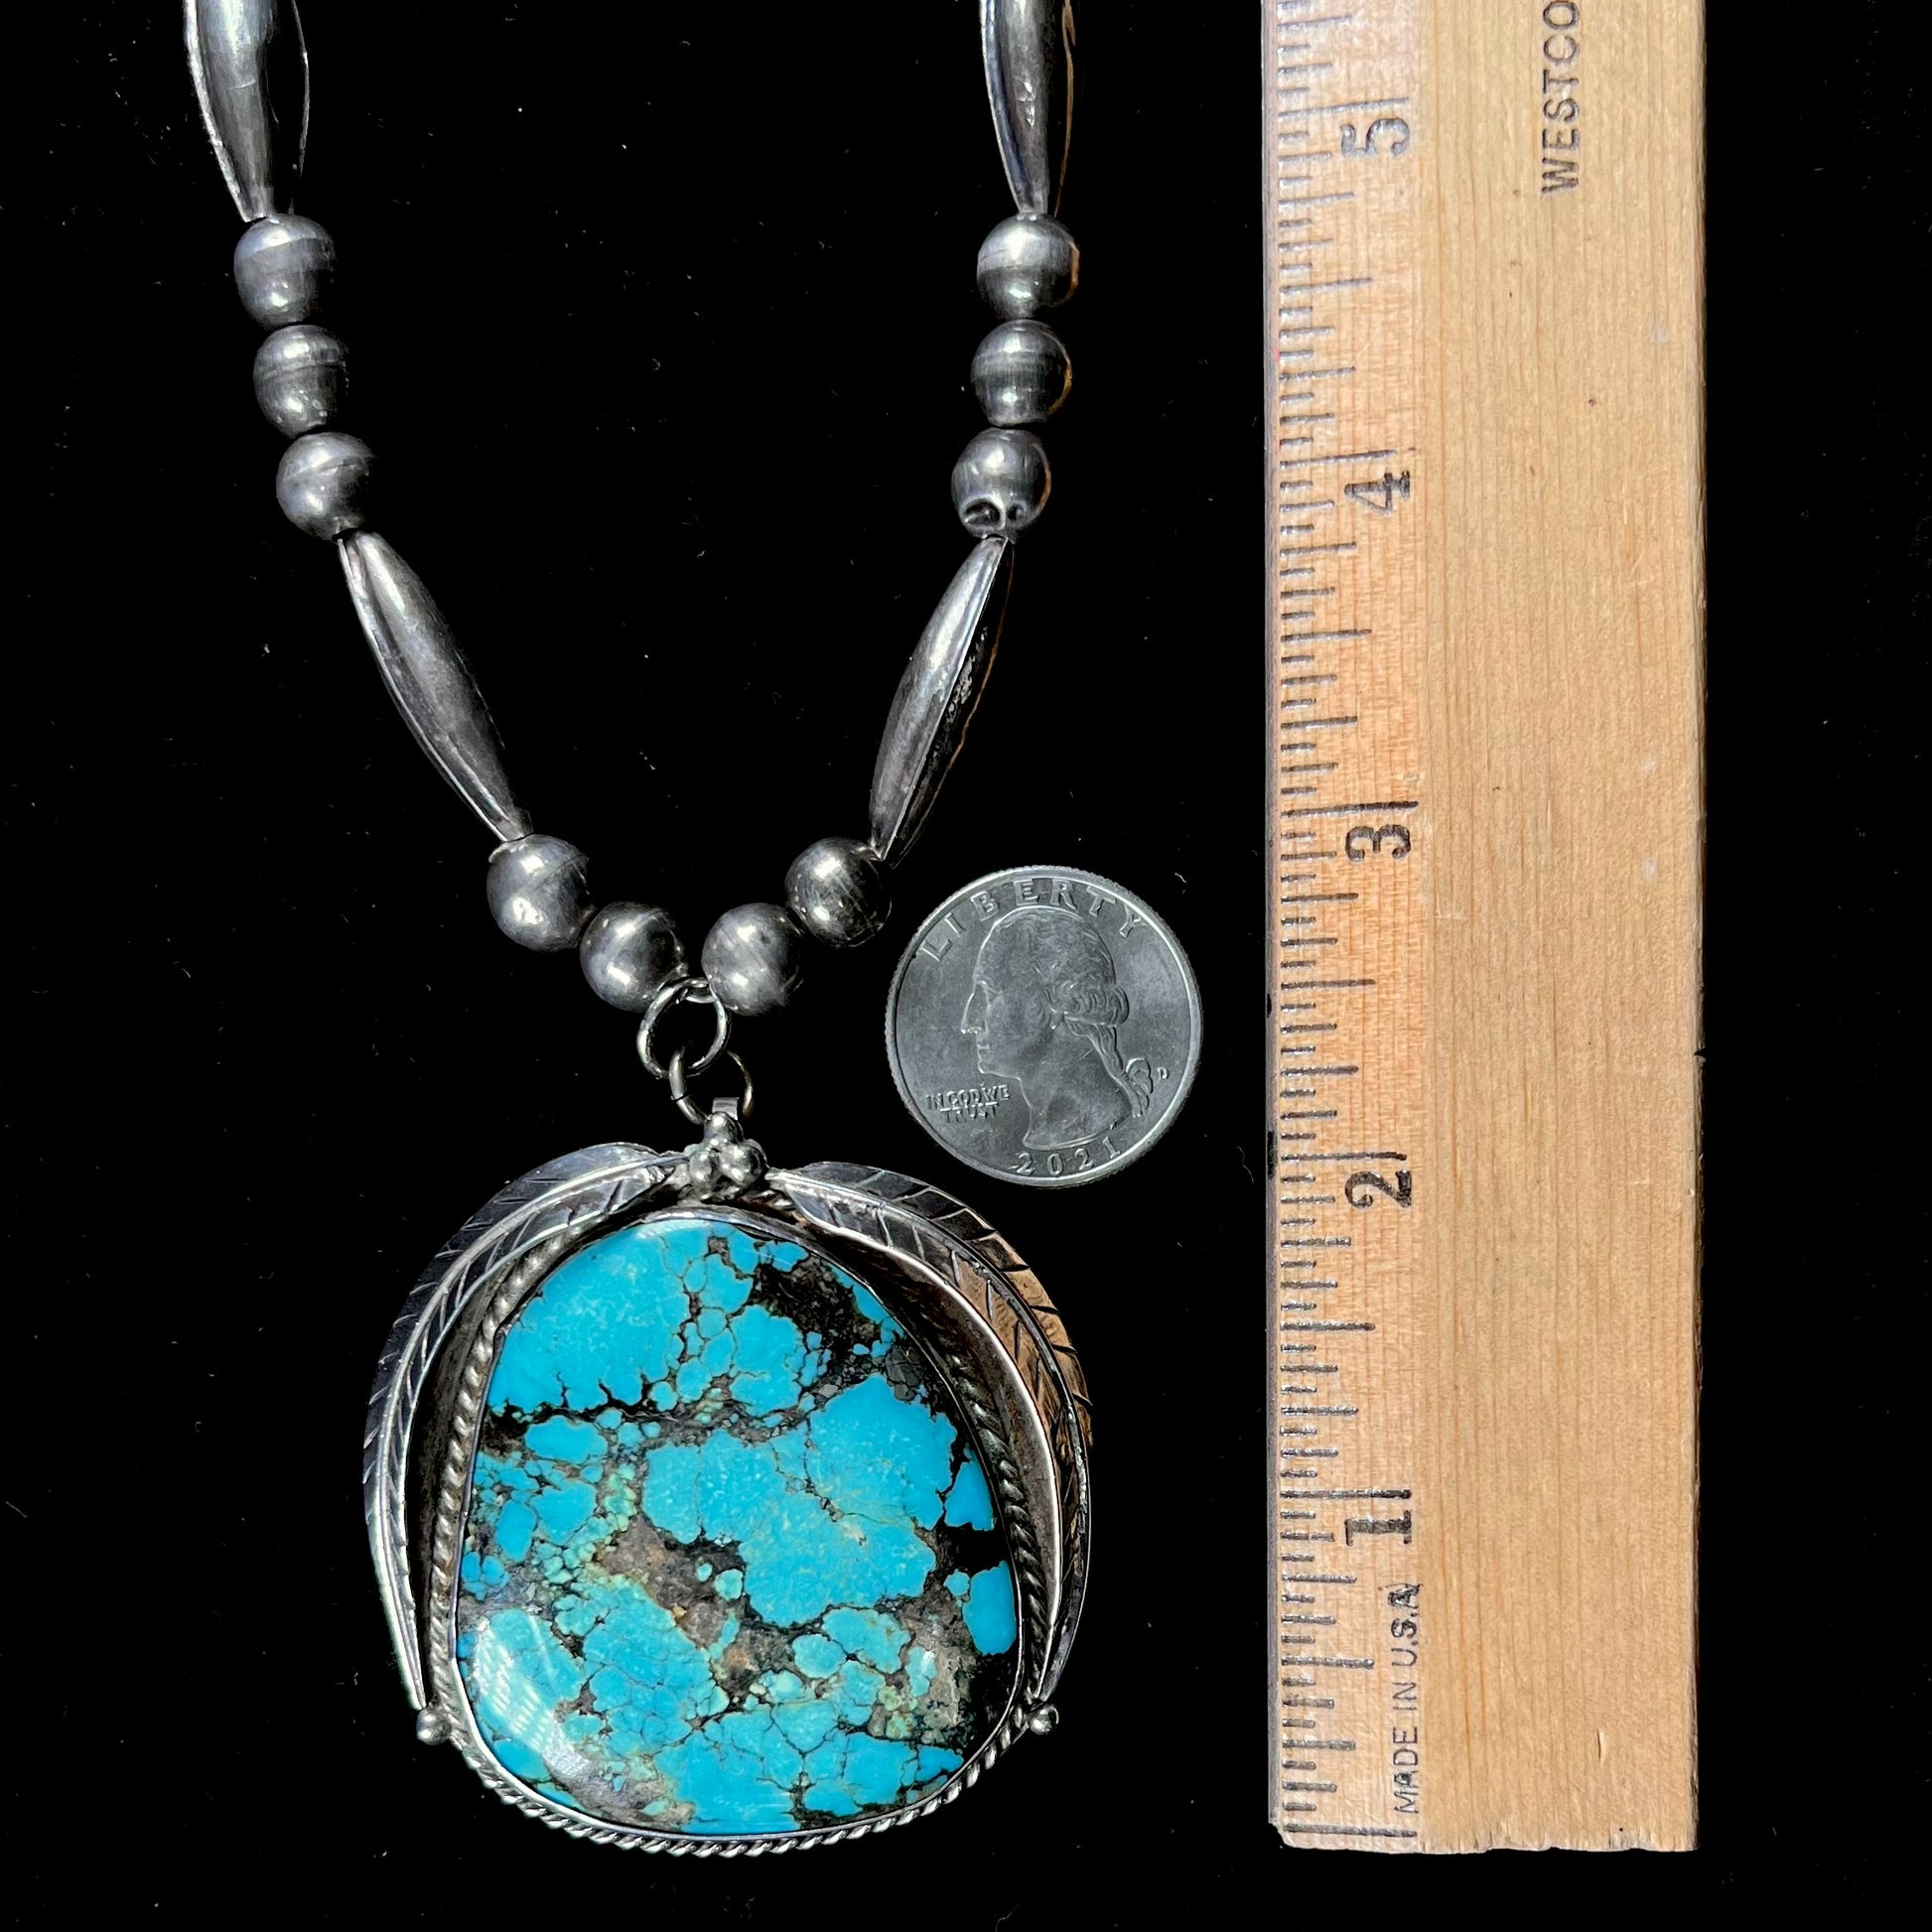 A Navajo style silver beaded necklace set with a Kingman spiderweb turquoise stone.